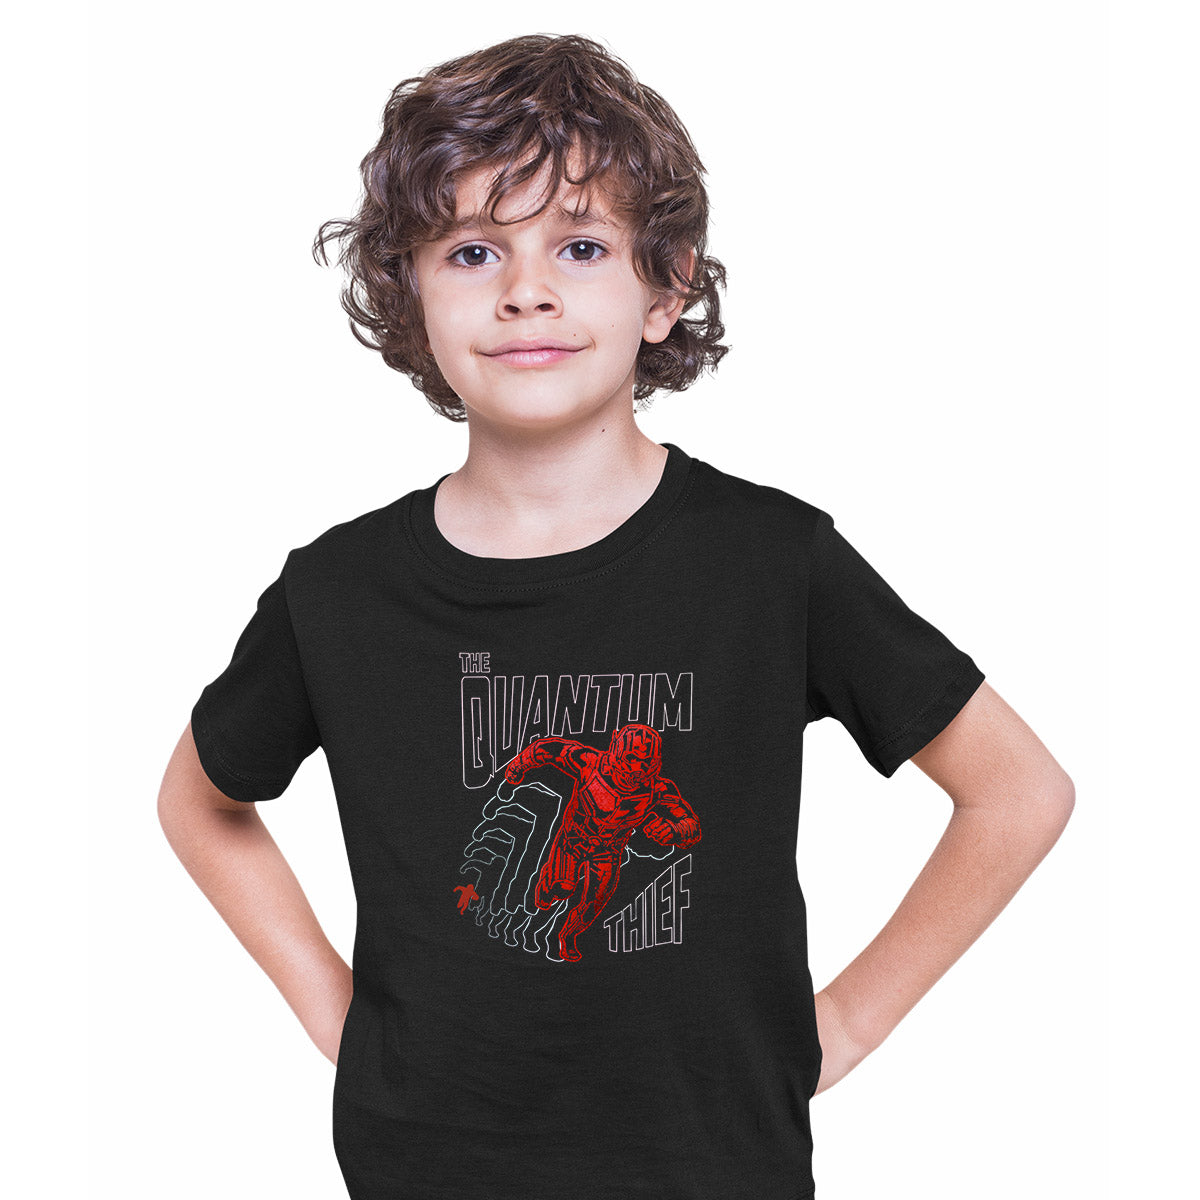 Ant-Man and the Wasp Quantumania Kids Black Tee